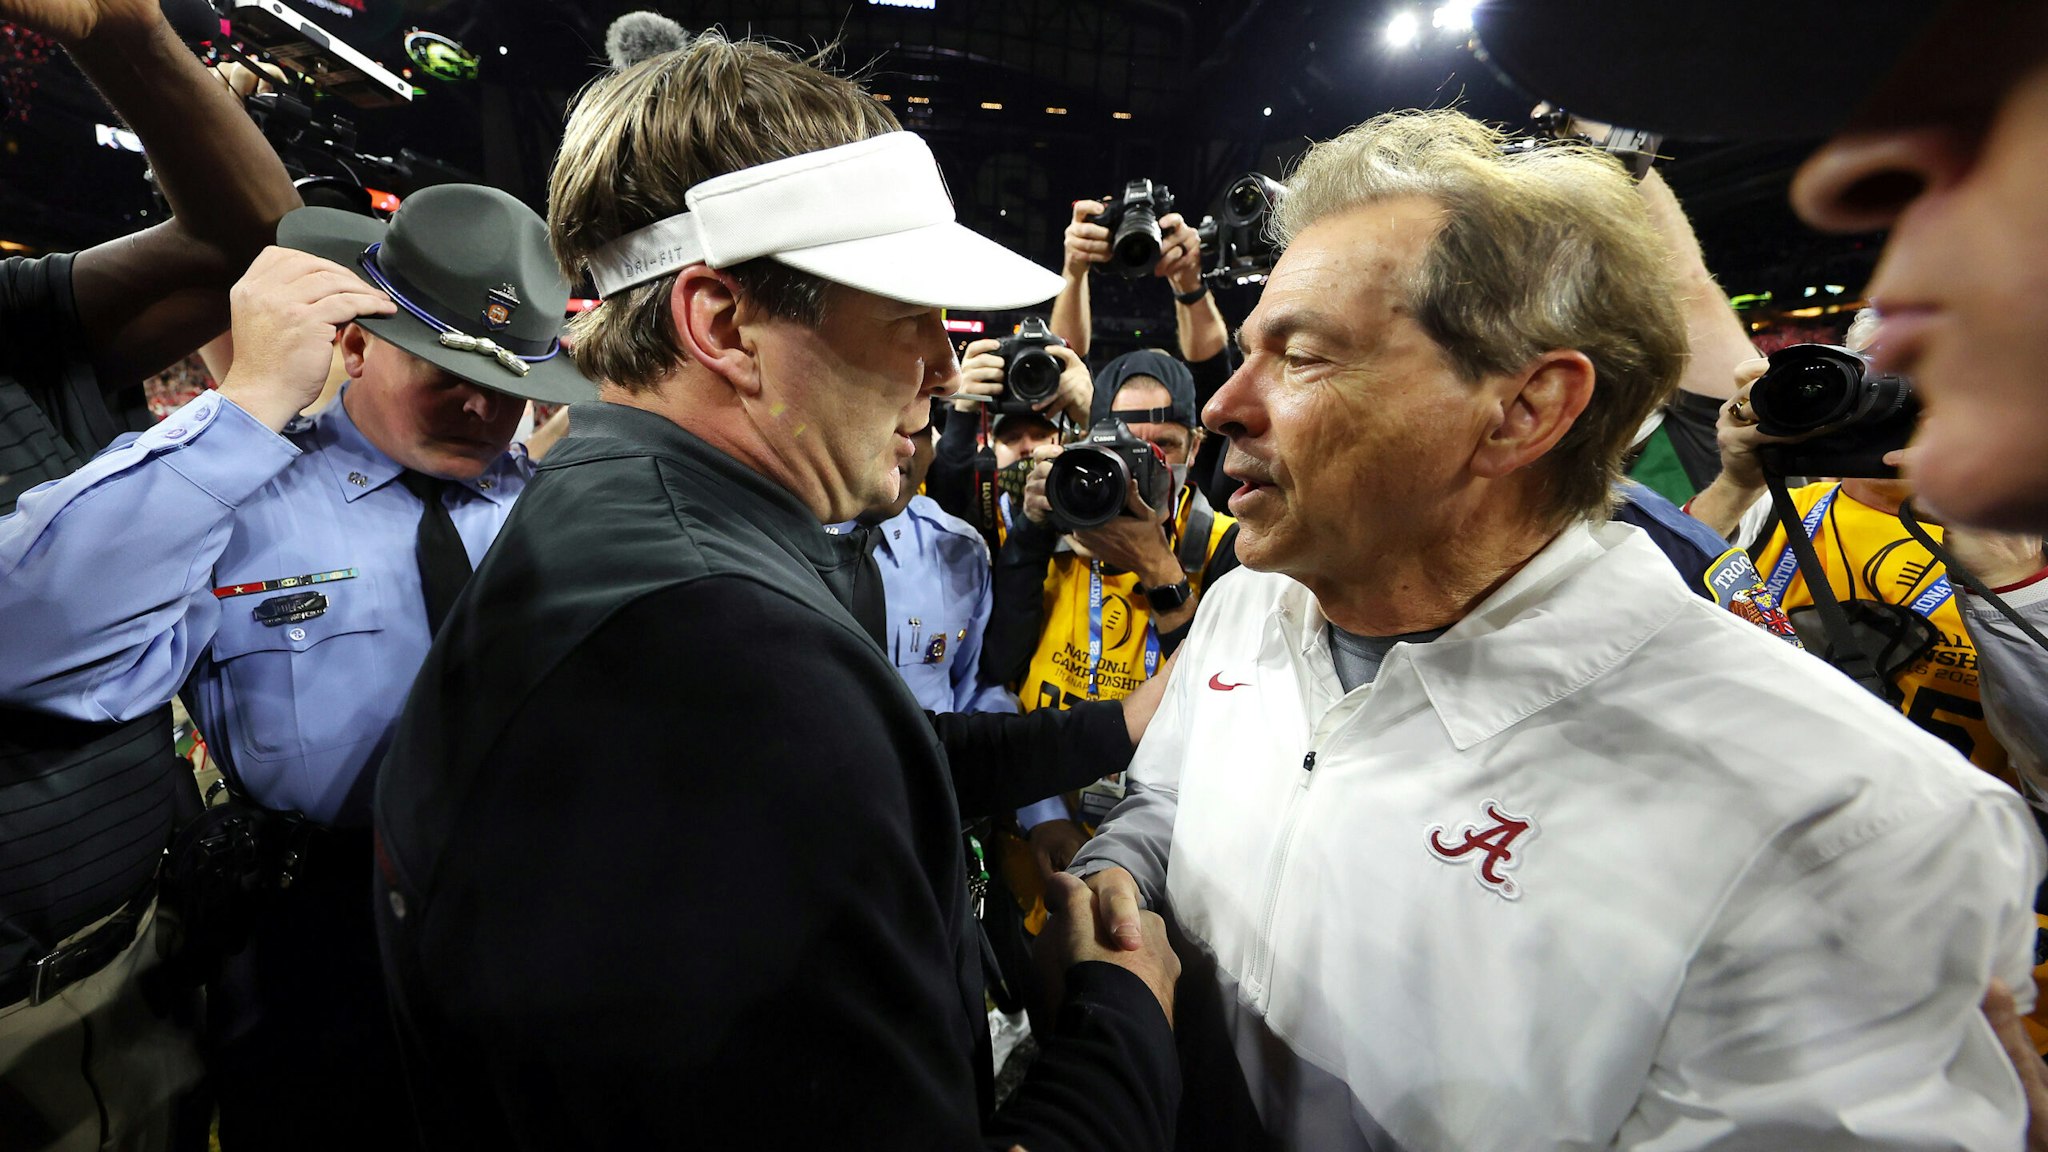 INDIANAPOLIS, INDIANA - JANUARY 10: Head Coach Nick Saban of the Alabama Crimson Tide and Head Coach Kirby Smart of the Georgia Bulldogs shake hands after the Georgia Bulldogs defeated the Alabama Crimson Tide 33-18 in the 2022 CFP National Championship Game at Lucas Oil Stadium on January 10, 2022 in Indianapolis, Indiana.